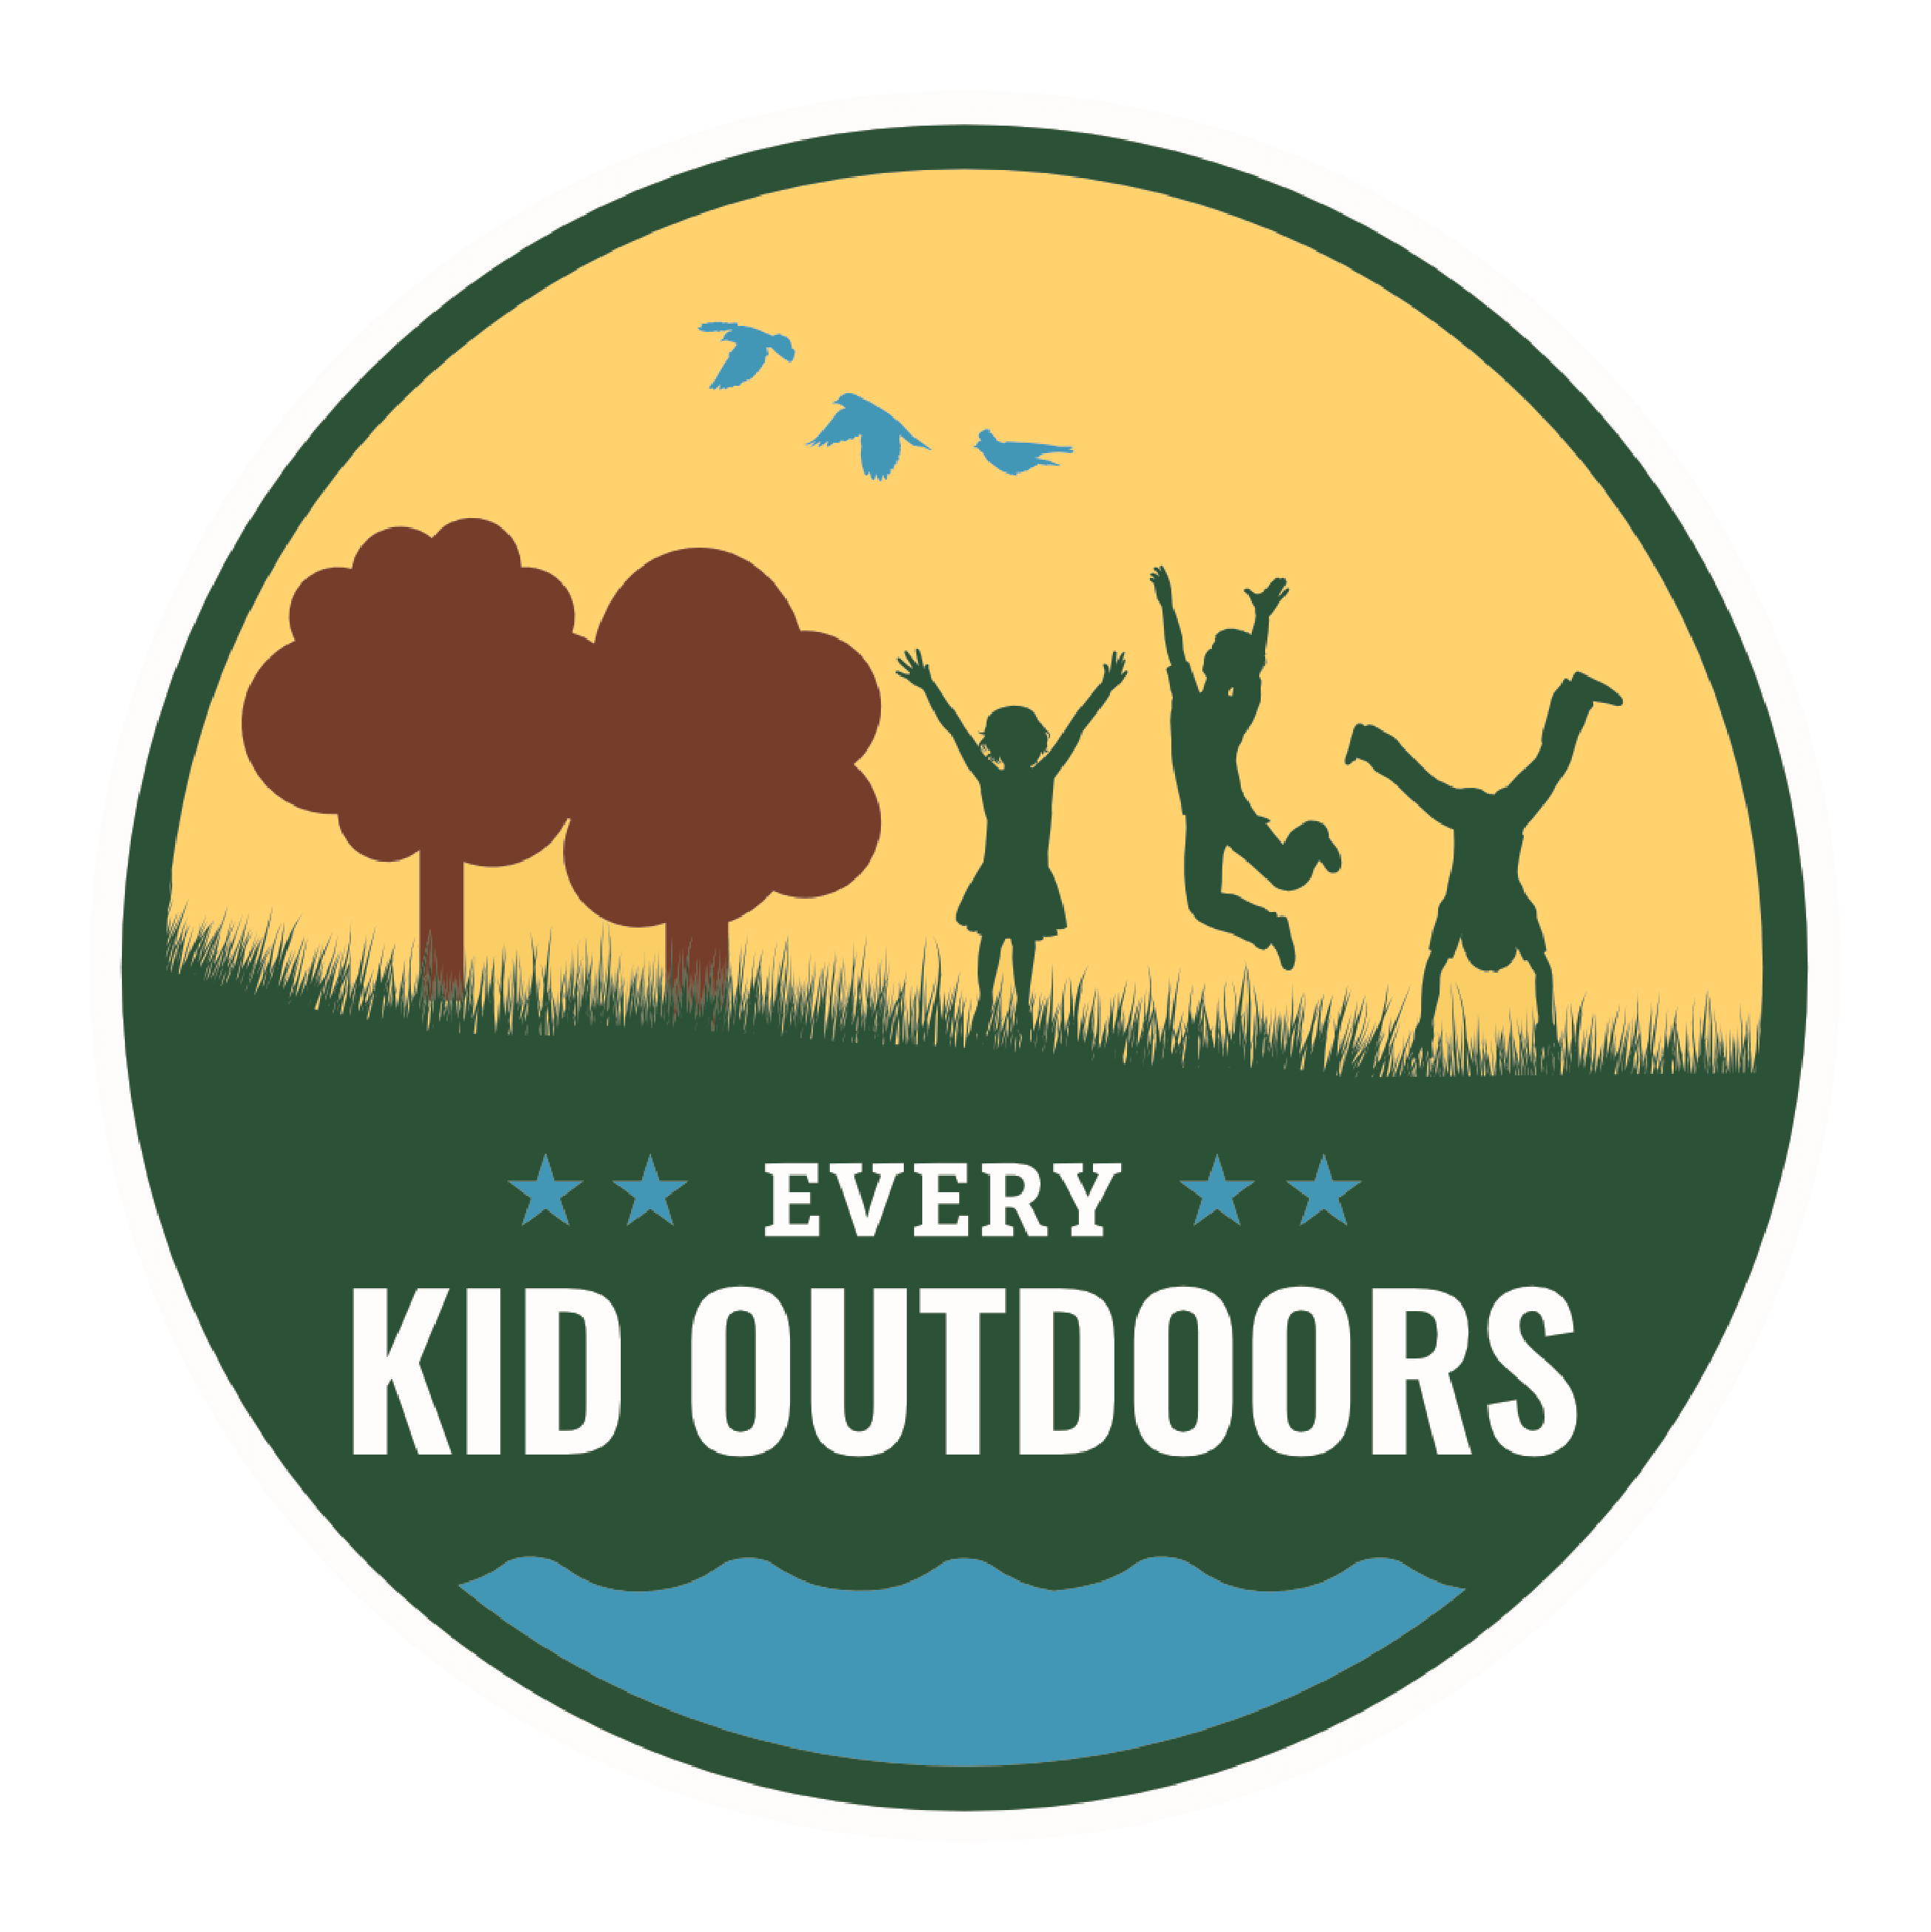 circular logo with children playing near trees and text "Every Kid Outdoors"